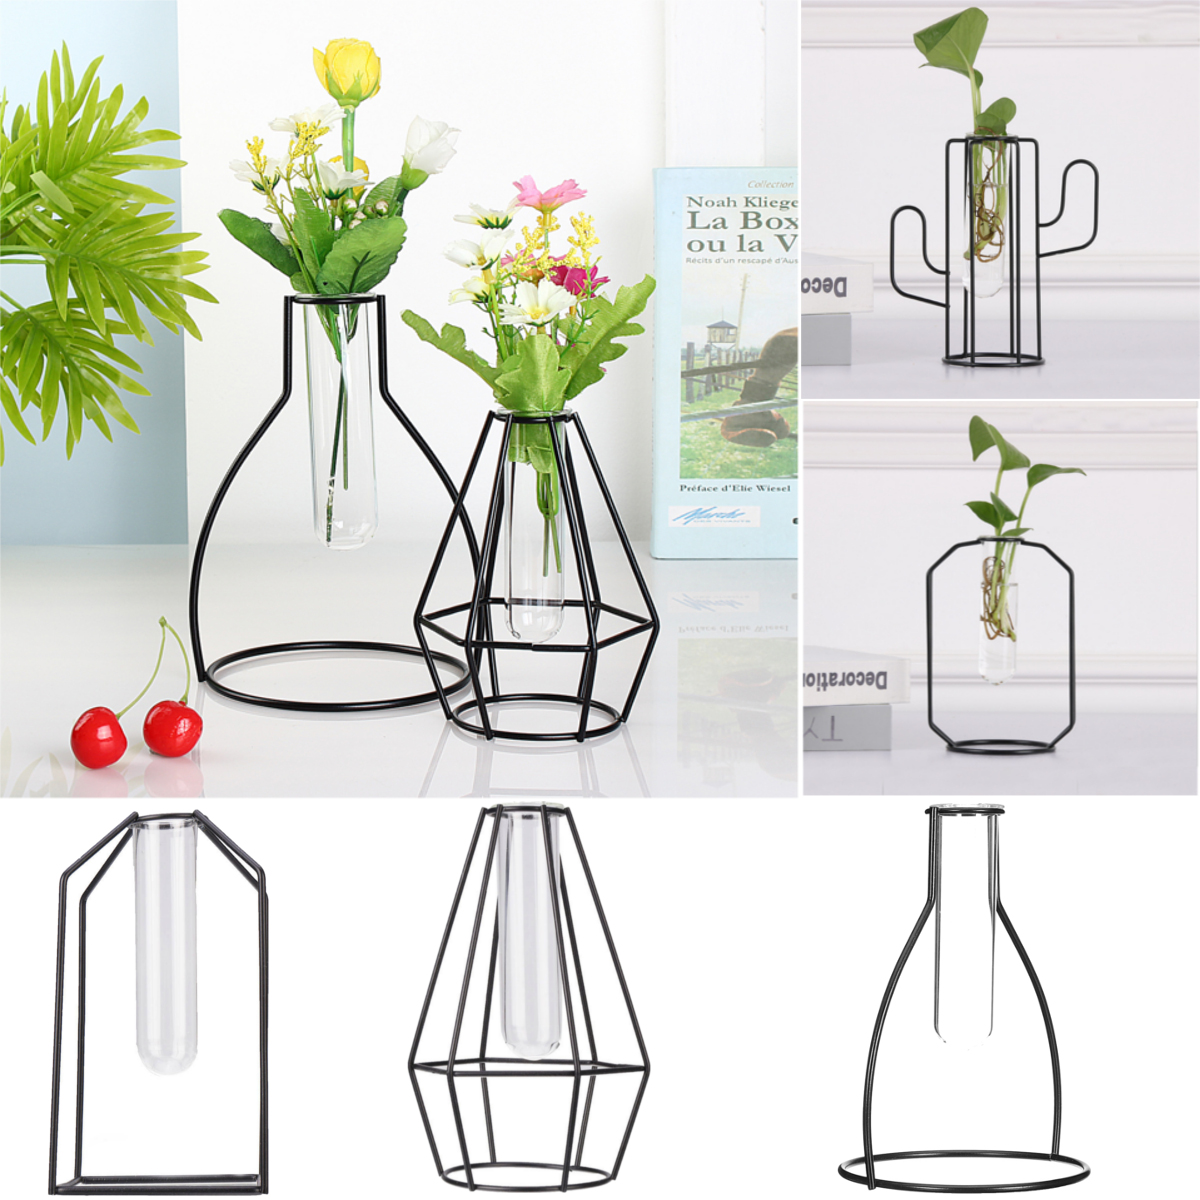 Creative-Hanging-Test-Tube-Glass-Vase-Hydroponic-Flower-Container--Base-Holder-1530229-1